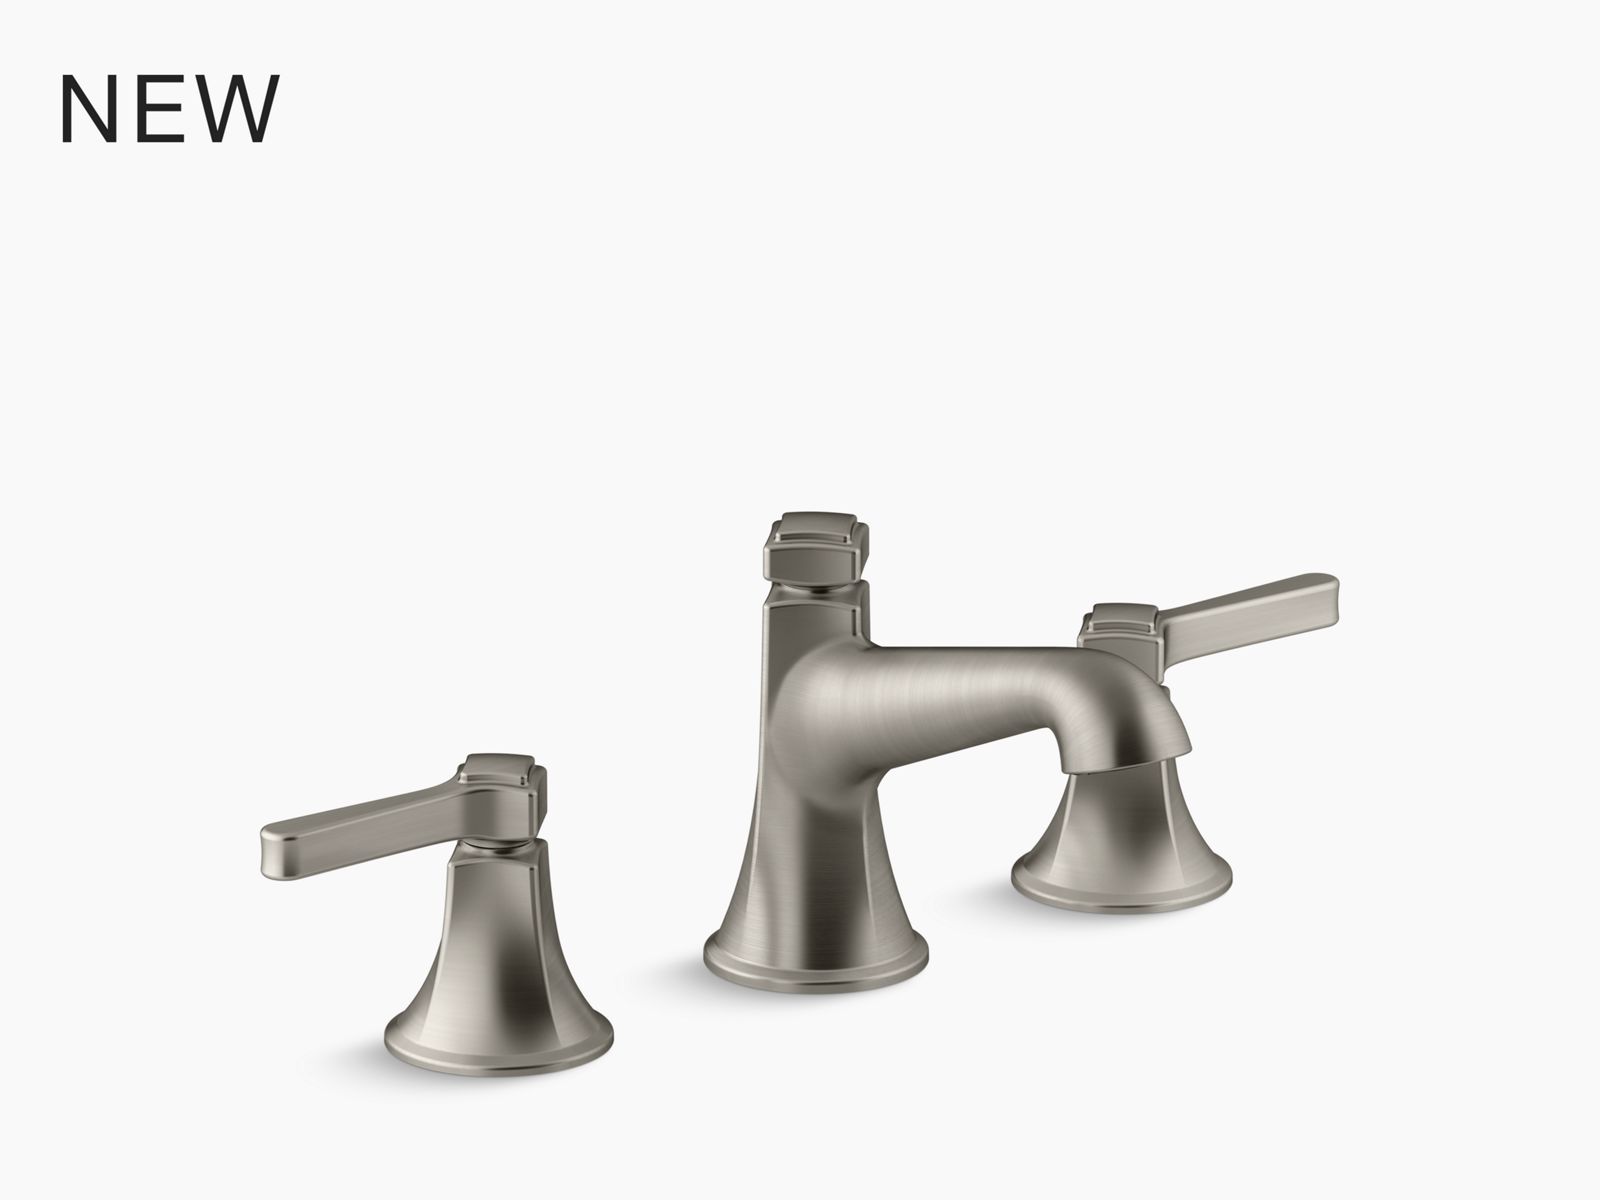 PARALLEL TWO-HANDLE WALL-MOUNT LAV FAUCET TRIM